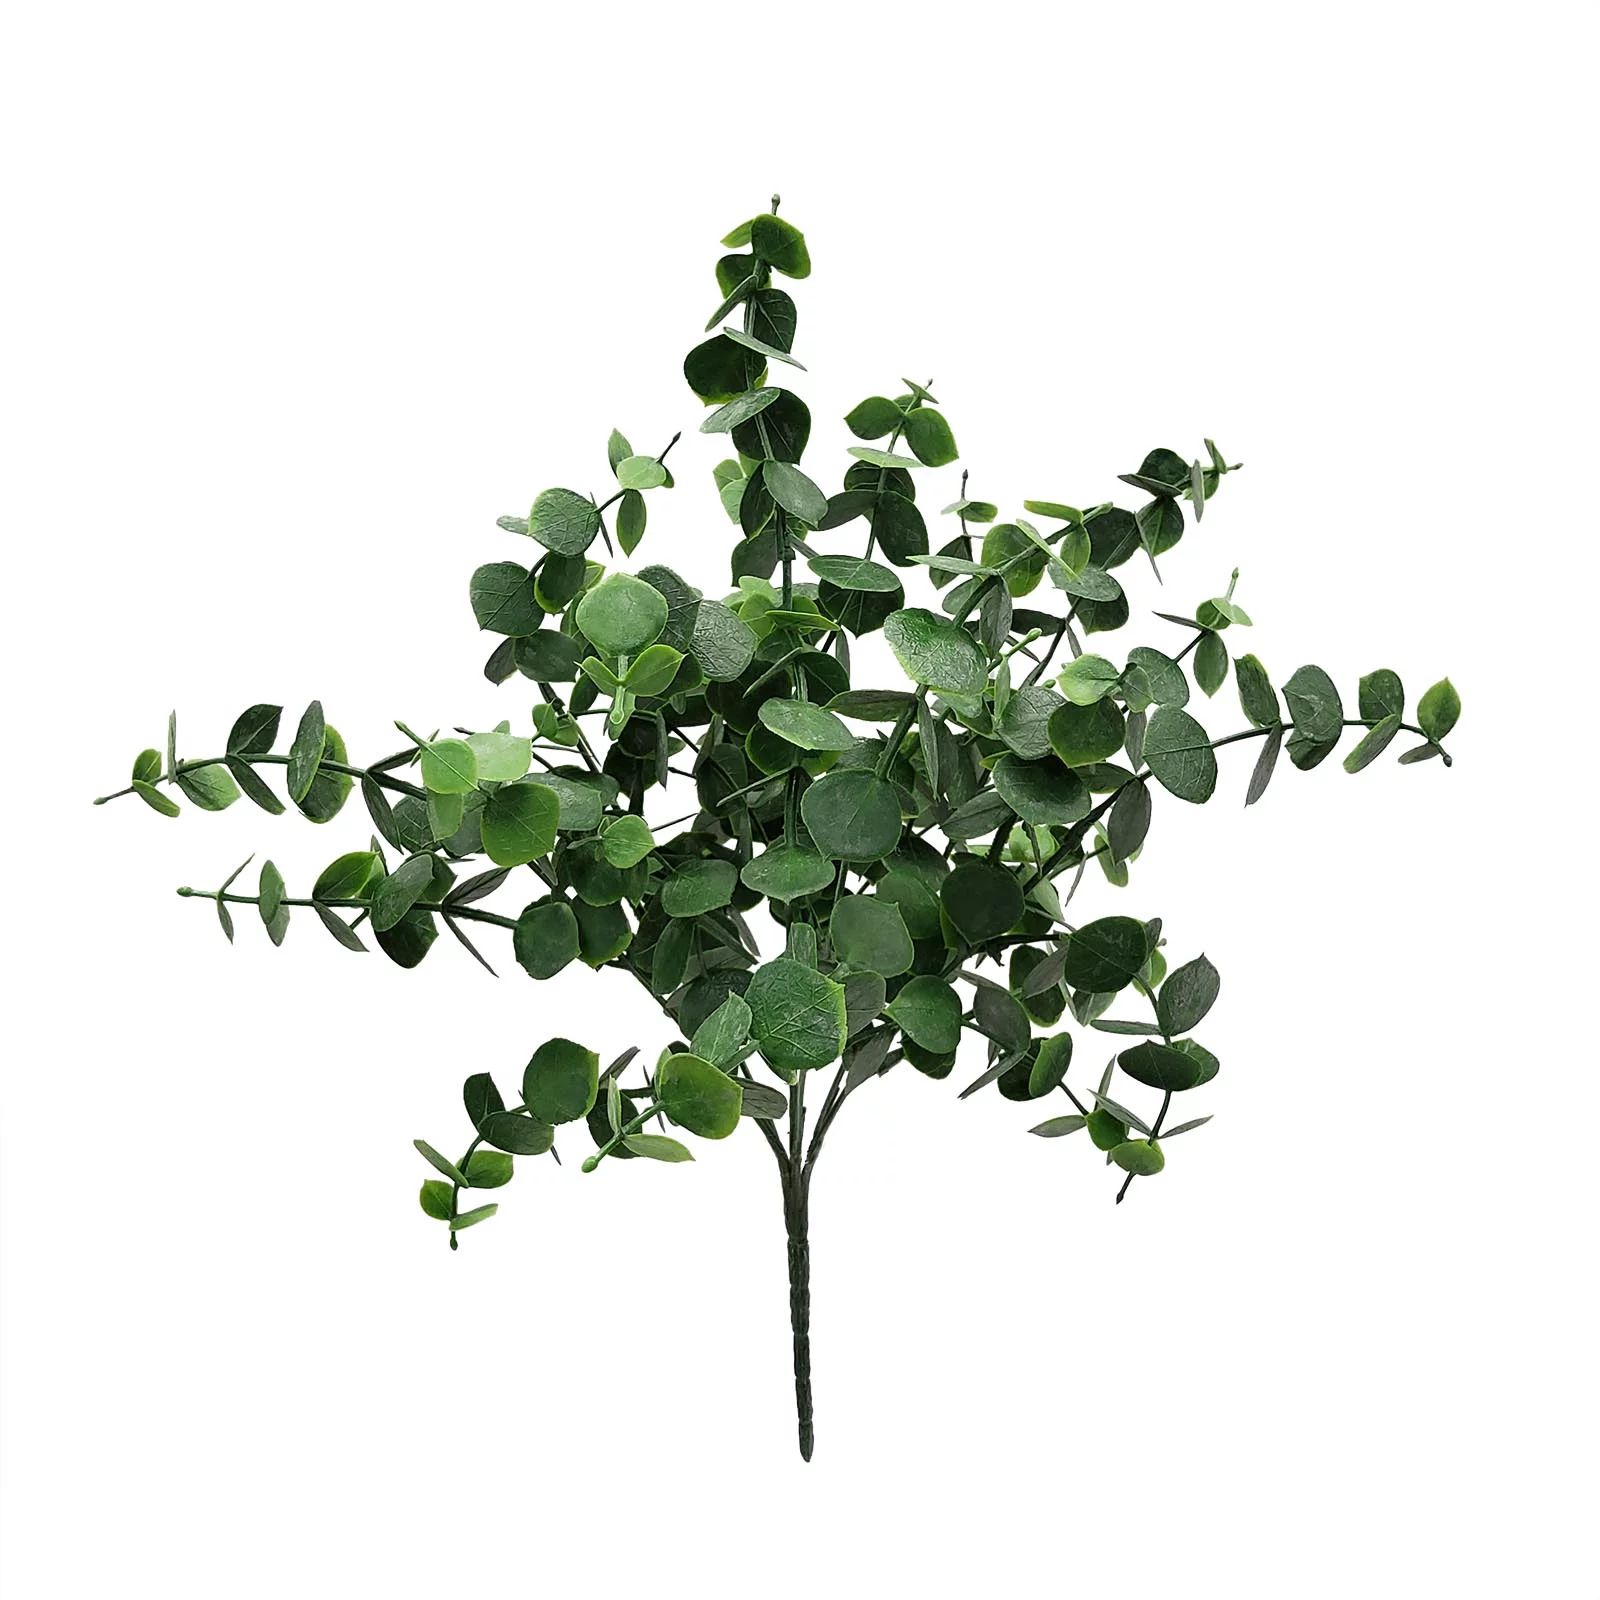 Mainstays 14in Indoor Artificial Eucalyptus Leaves Pick, Green Color. Weight 0.14lb, Pot Not Incl... | Walmart (US)